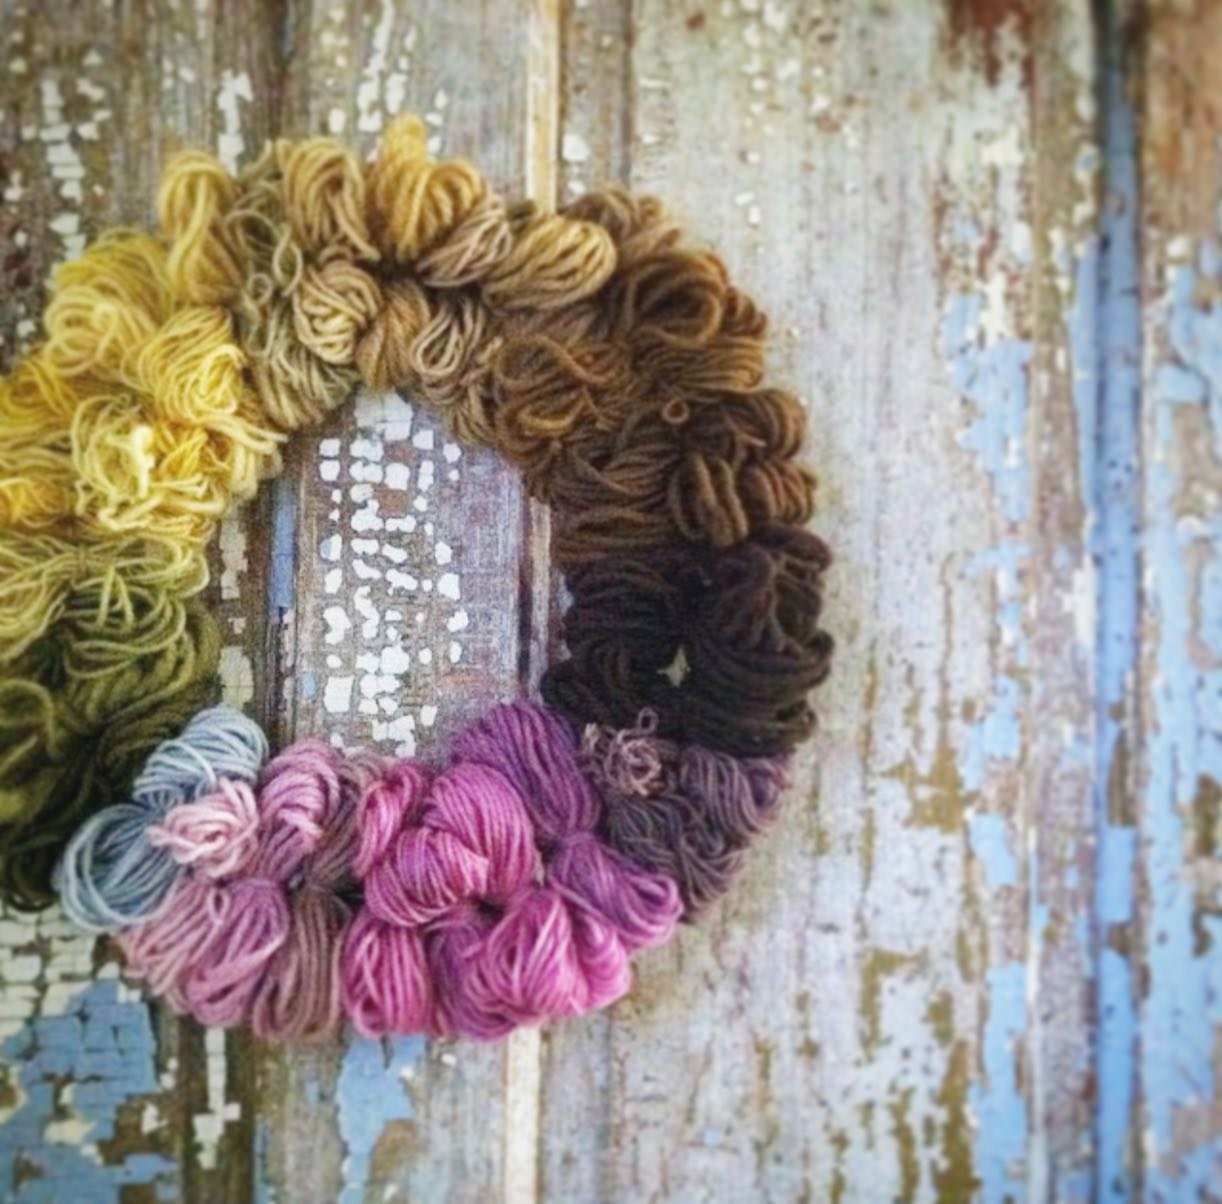 Naturally dyed wreath 🌸🌿🌺Years ago, I created this wreath with naturally dyed yarn samples. 
When I was new to natural dyeing, I was so excited to try anything that would create a color, even when advised it may not be colorfast (i.e., black beans